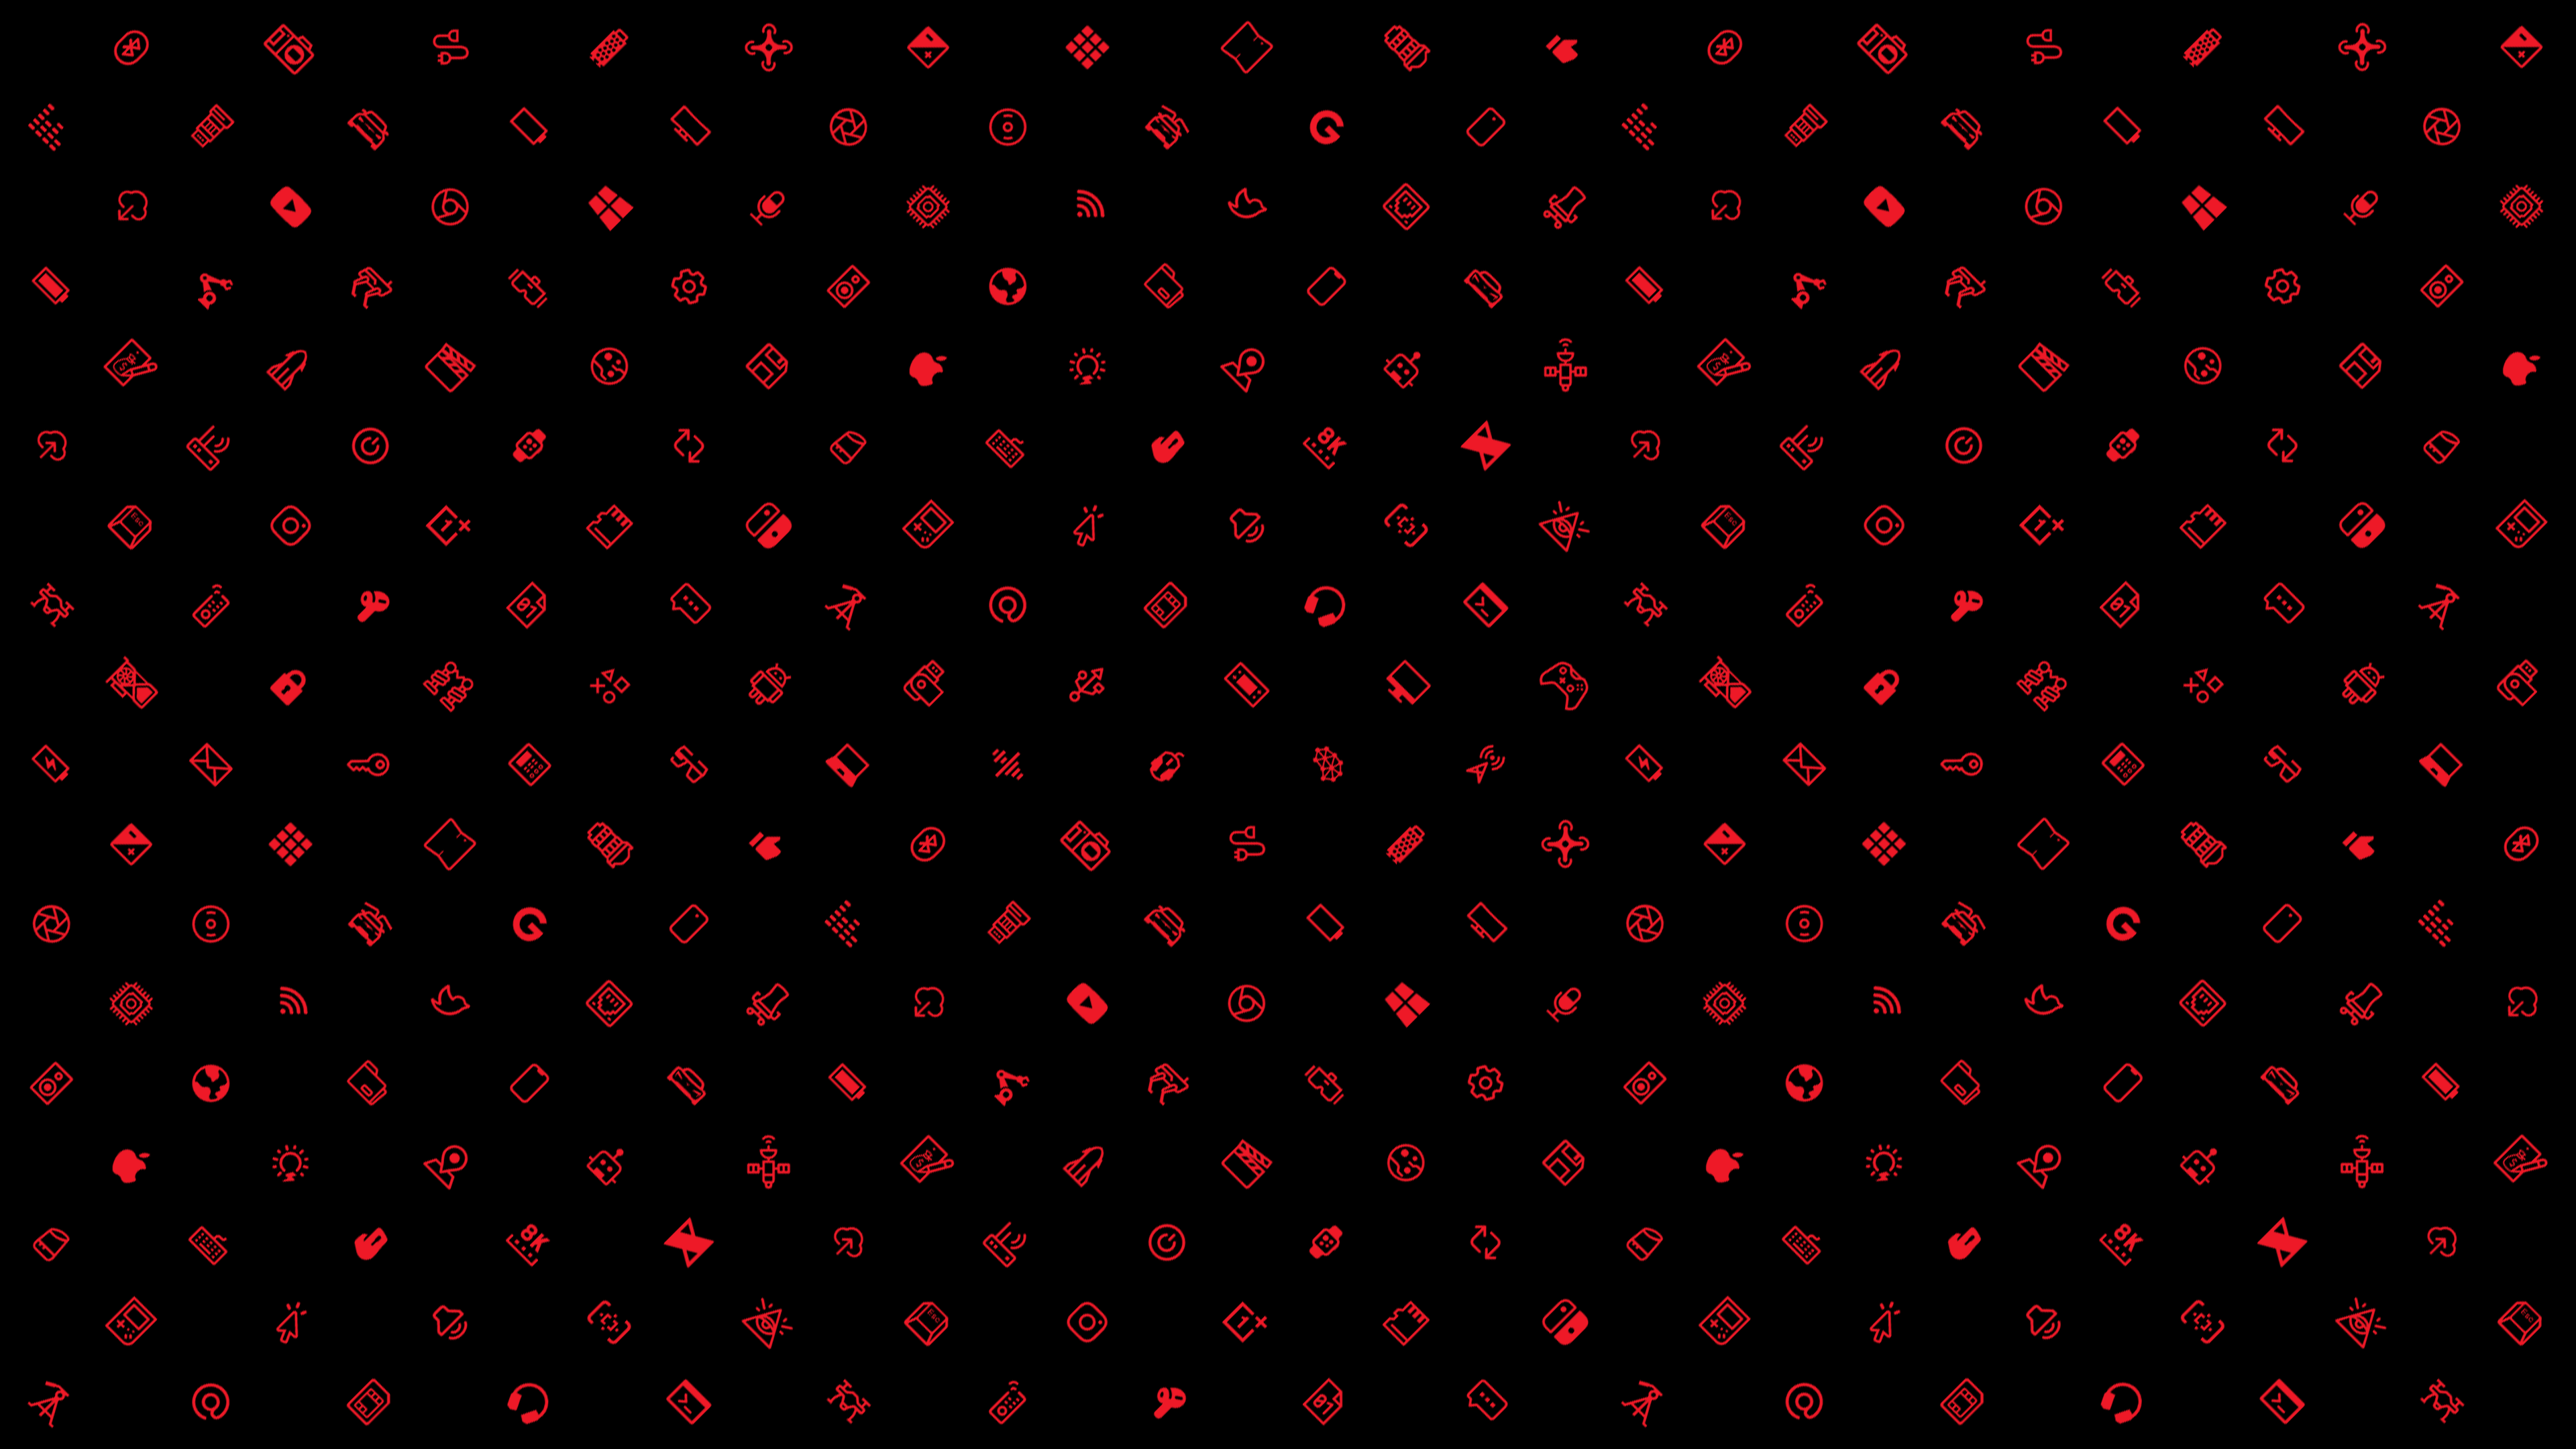 More colors added) 4k Wallpaper >> MKBHD ICONS dbrand collab (3840x2160) (image credits dbrand)